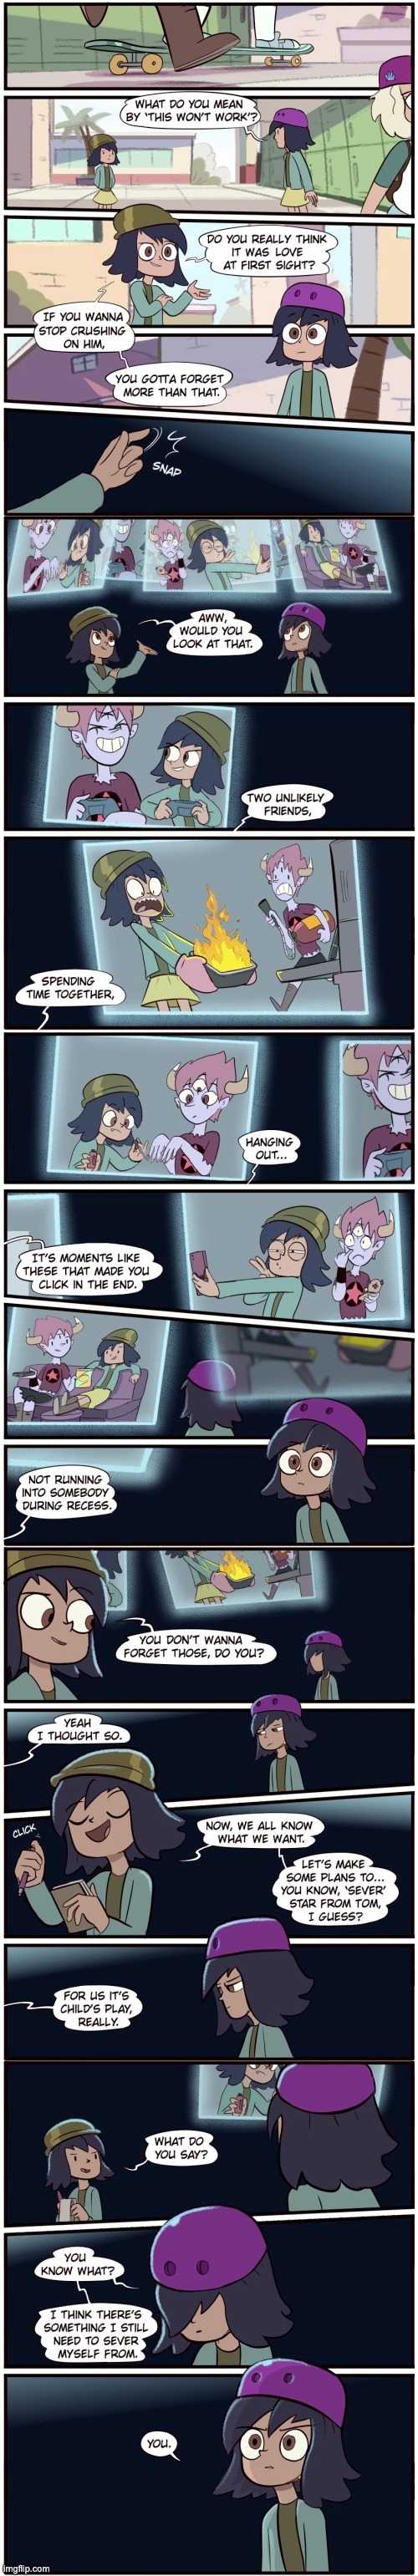 Tom vs Jannanigans: Happily Sever’d After (Part 5) | image tagged in morningmark,comics,svtfoe,star vs the forces of evil,comics/cartoons,memes | made w/ Imgflip meme maker